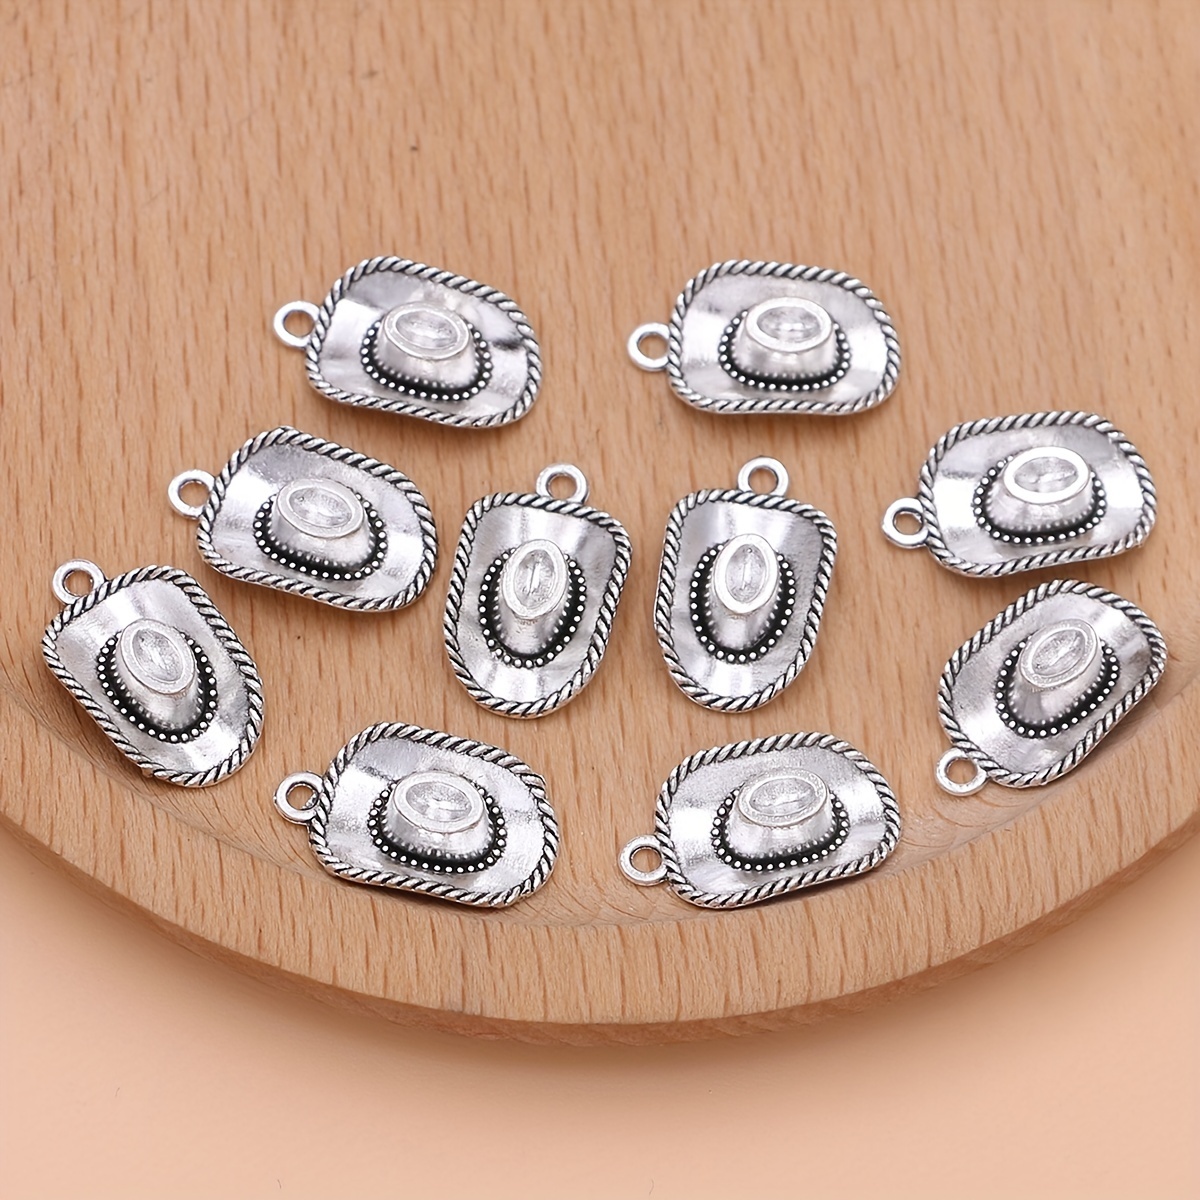 

10pcs Antique Silvery Plated Cowboy Hat Creative Charm Pendant Fashion For Jewelry Making Bracelet Necklace Earrings Keychain Bag Clothing Charms Accessories Diy Craft